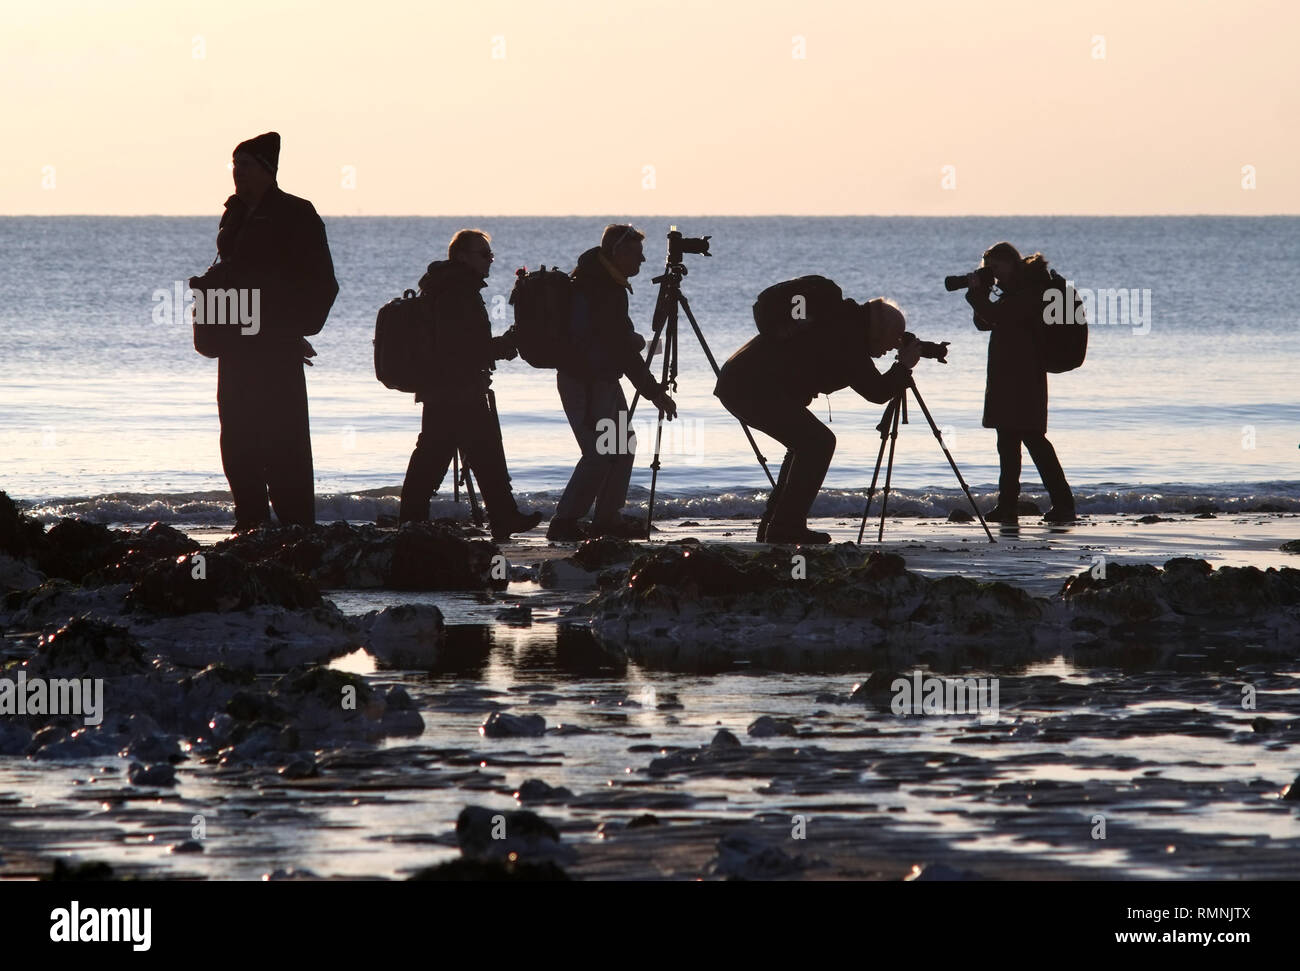 Group of amateur photographers photographing the sunset on a beach. Stock Photo